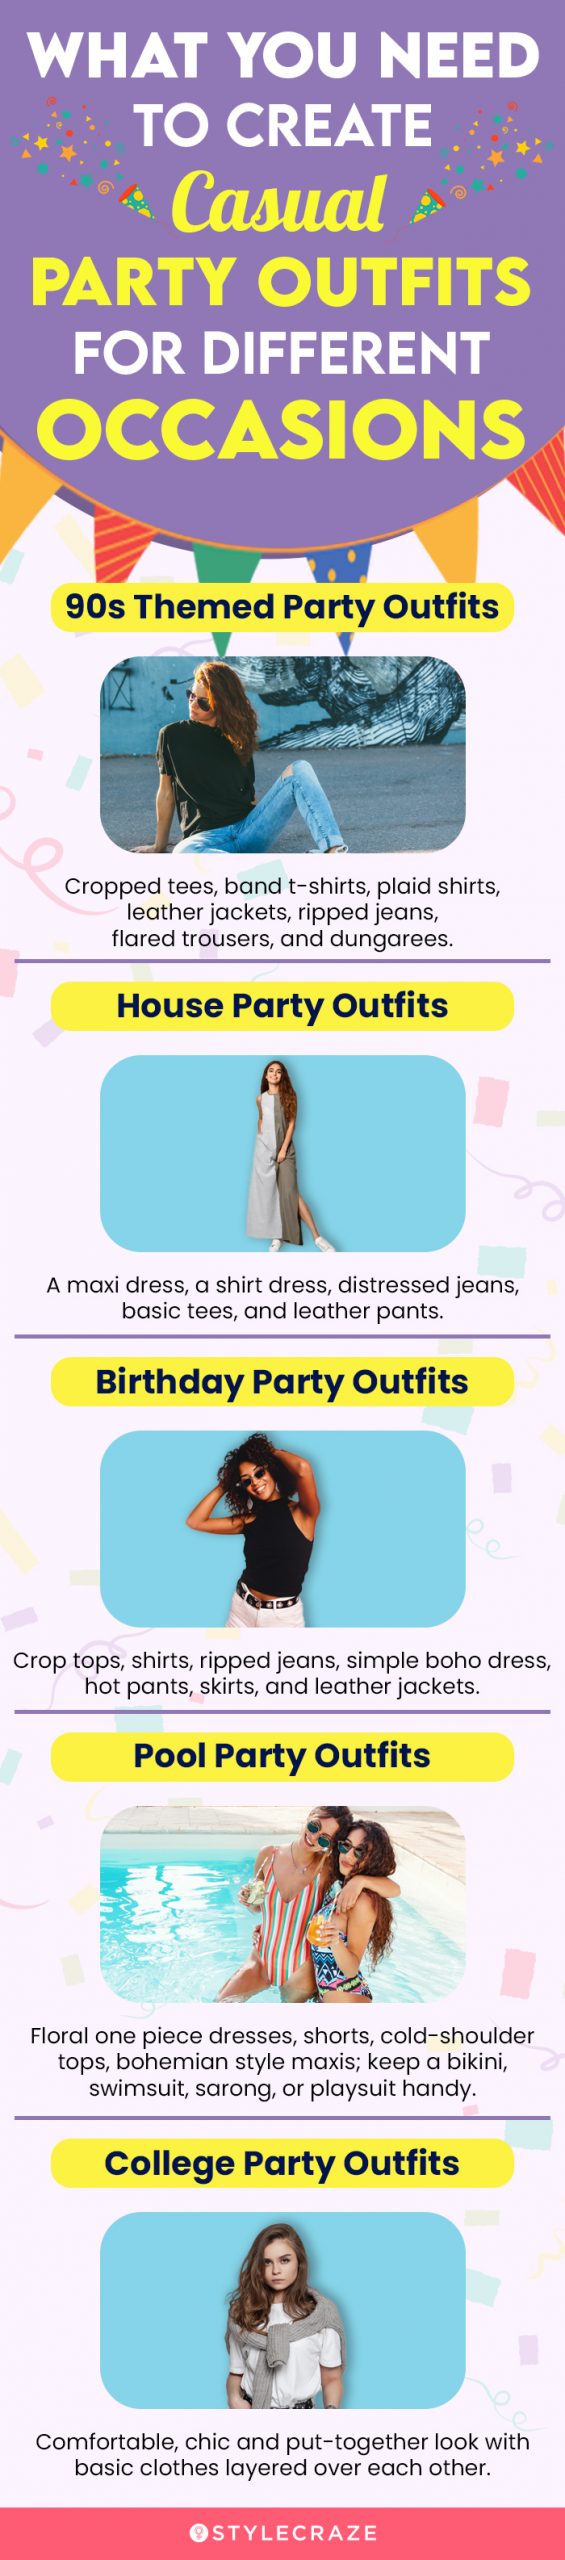 what you need to create casual party outfits for different occasions [infographic]